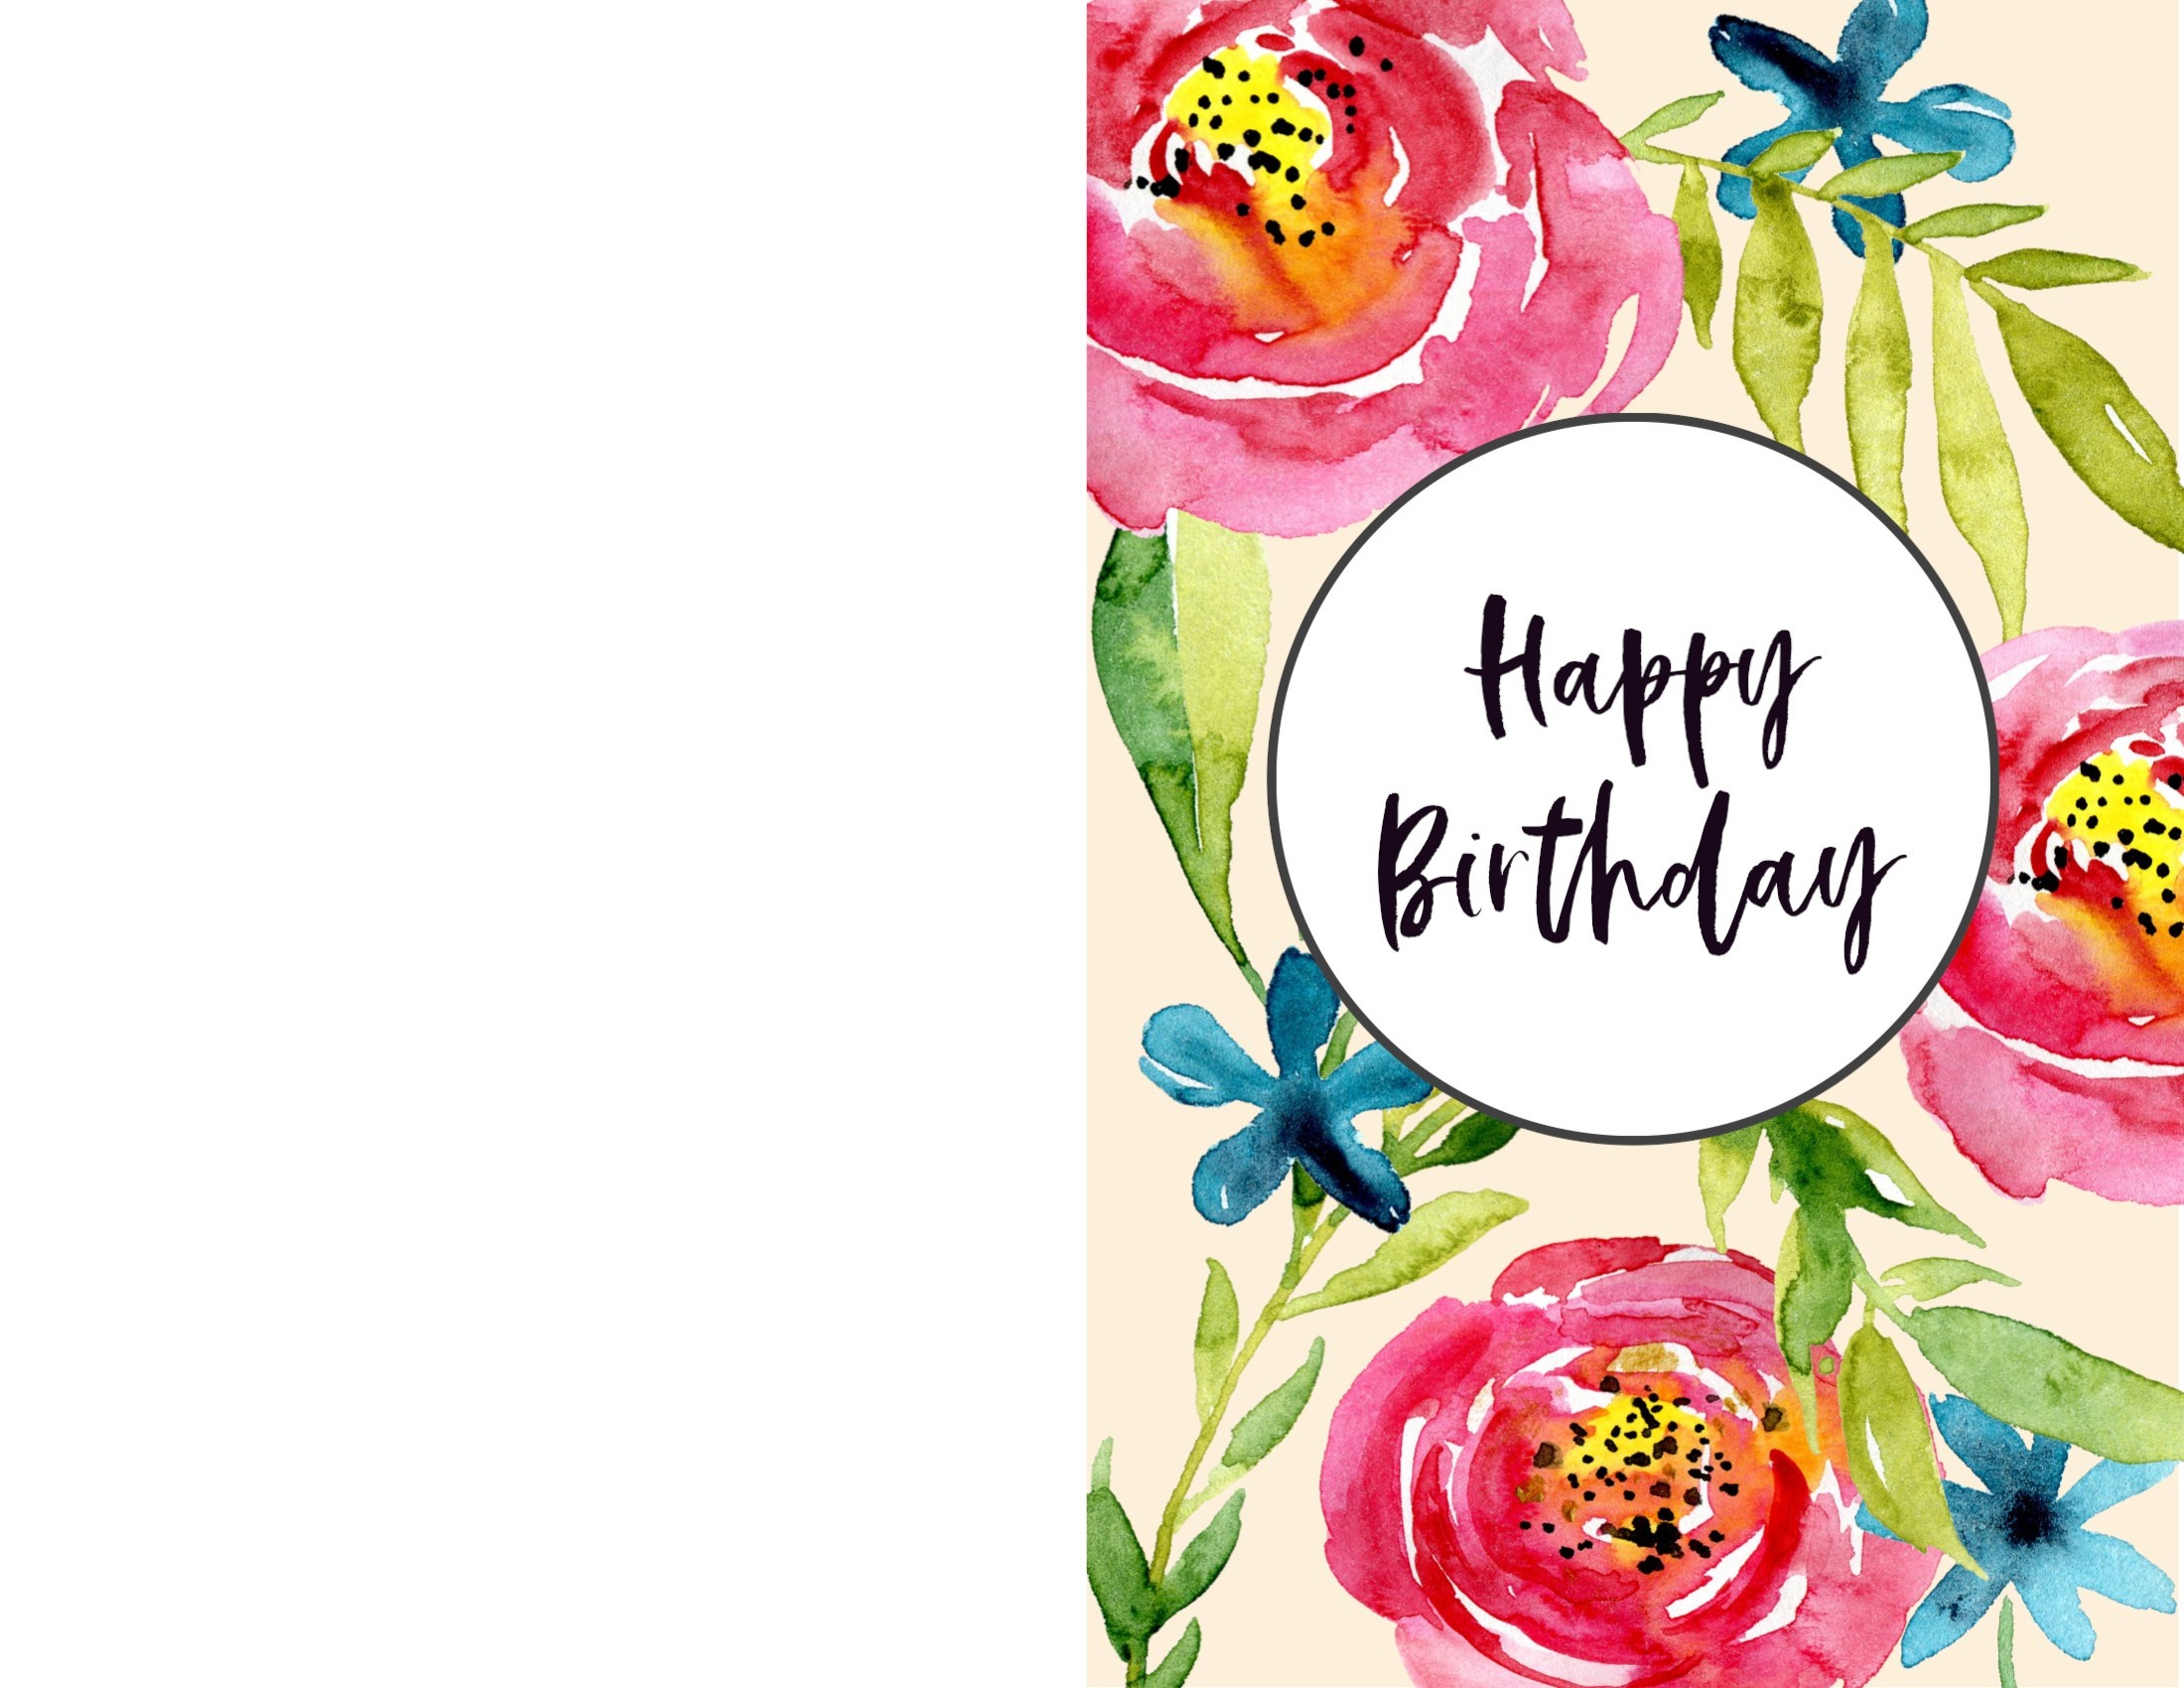 Free Printable Birthday Cards - Paper Trail Design - Happy Birthday Free Printable